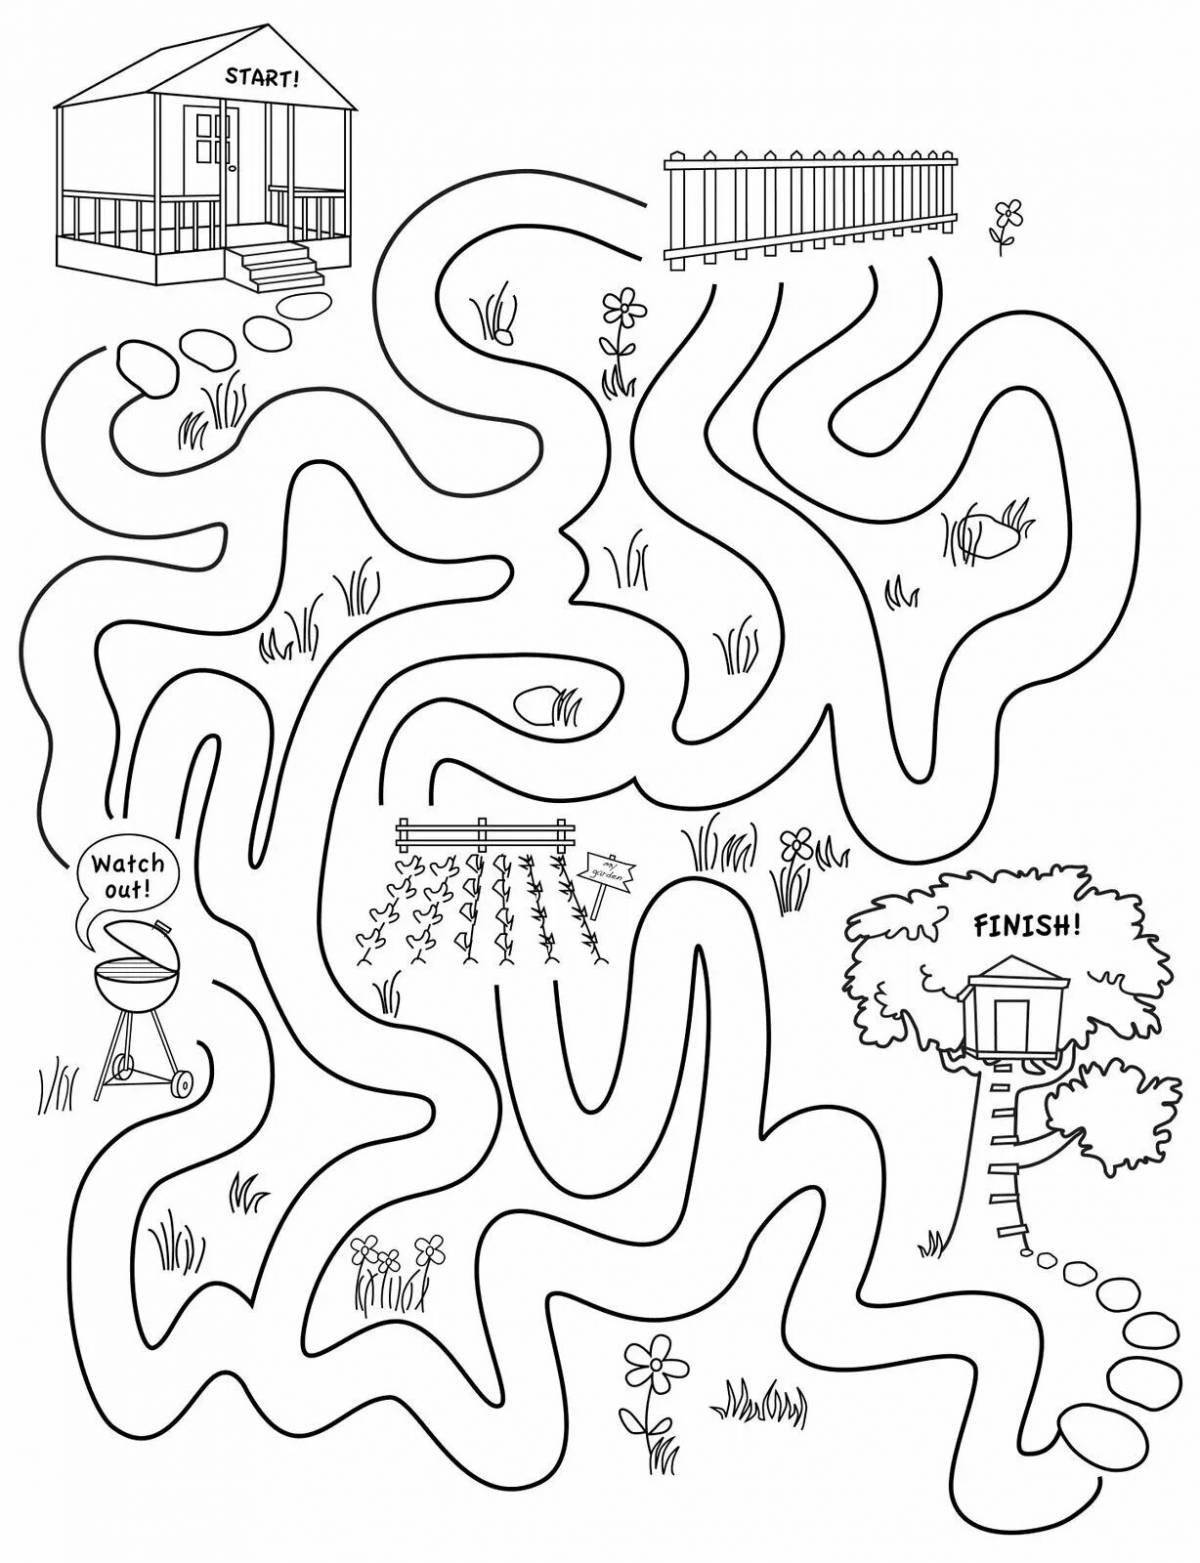 Mazes for children 4 5 years old #15